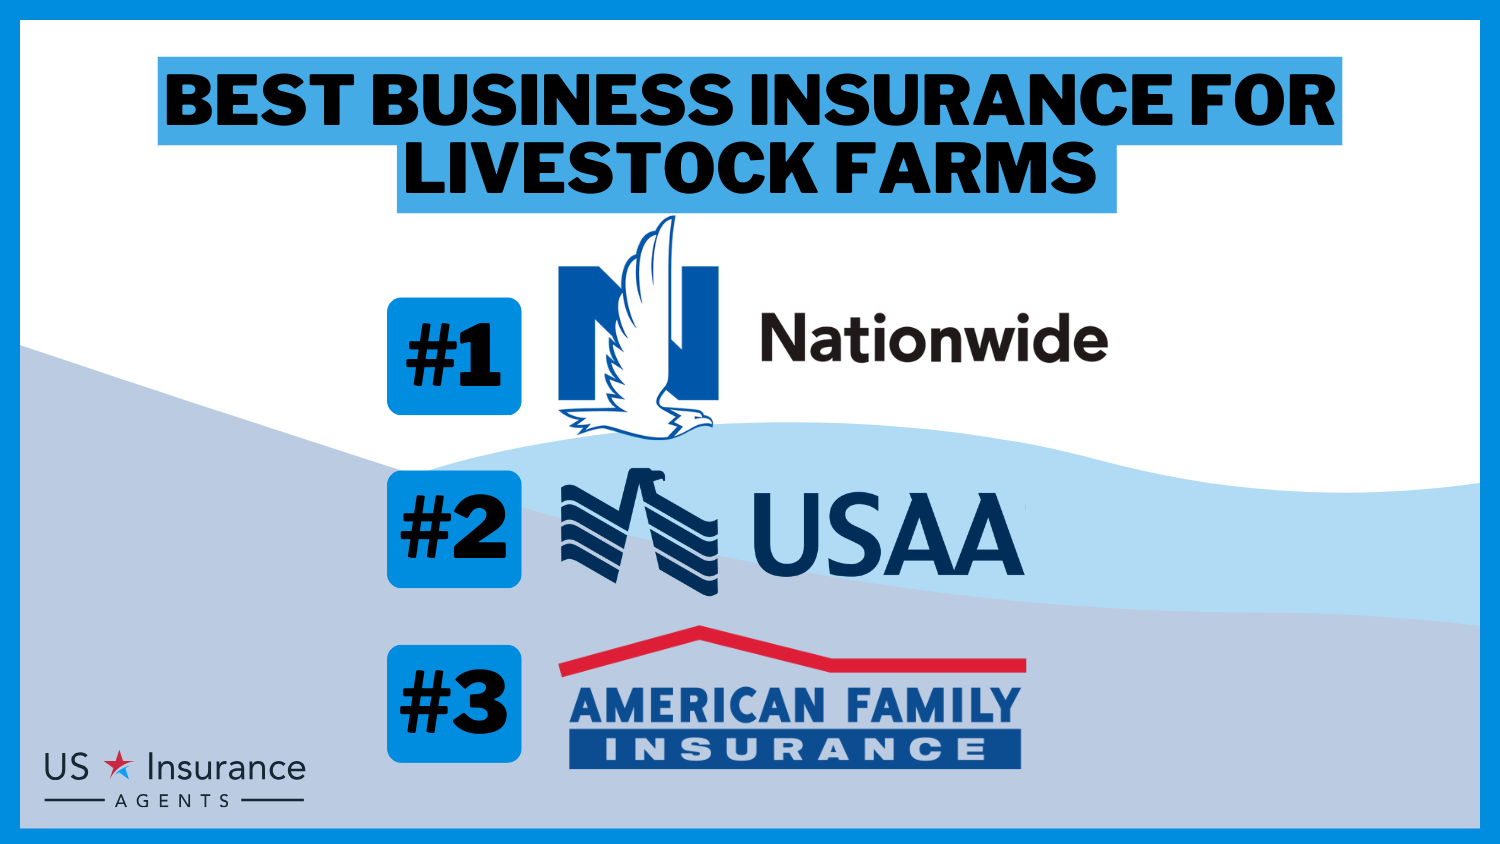 Nationwide, USAA, American Family: Best Business Insurance for Livestock Farms